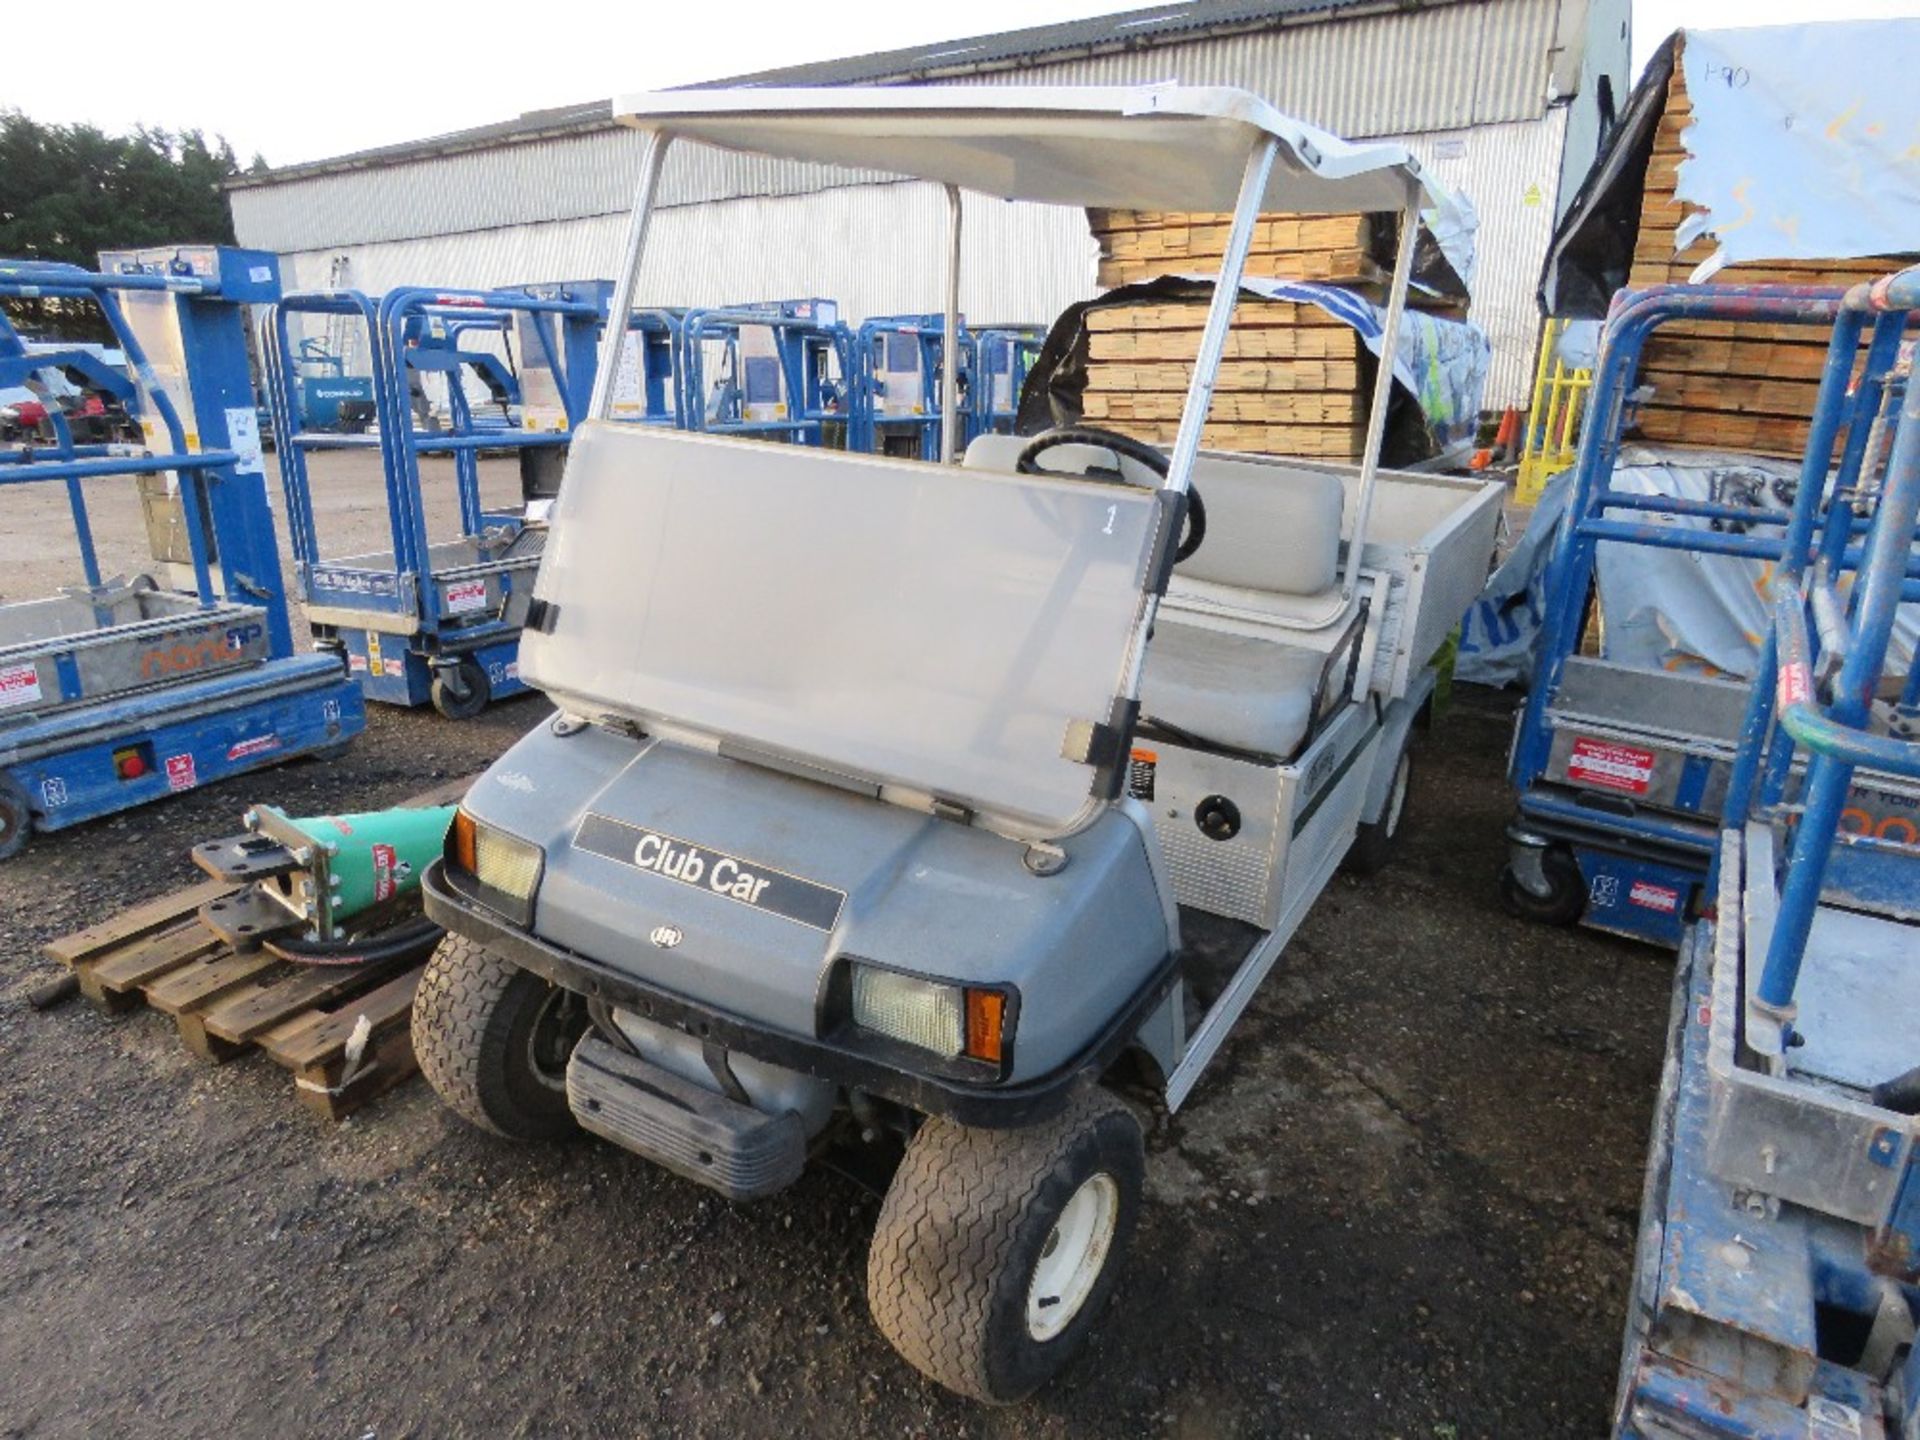 CLUBCAR CARRYALL TURF 2 PETROL ENGINED UTILITY TRUCK. WHEN TESTED WAS SEEN TO DRIVE, STEER AND BRAKE